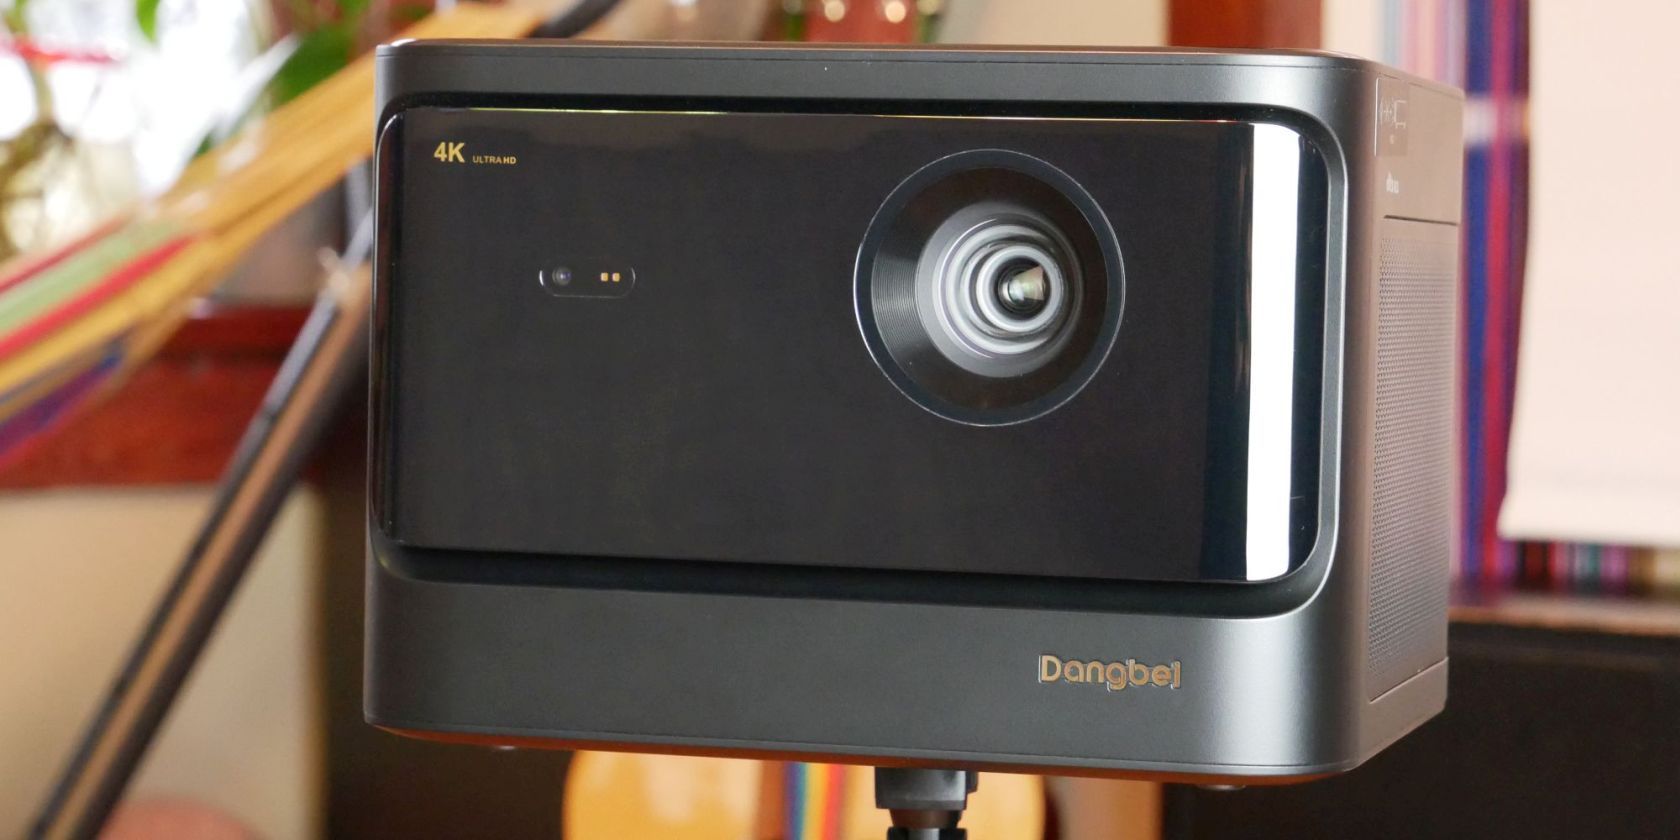 Is it advisable to buy a Dangbei Mars Pro 4K or an LG HU810pw projector? -  Quora